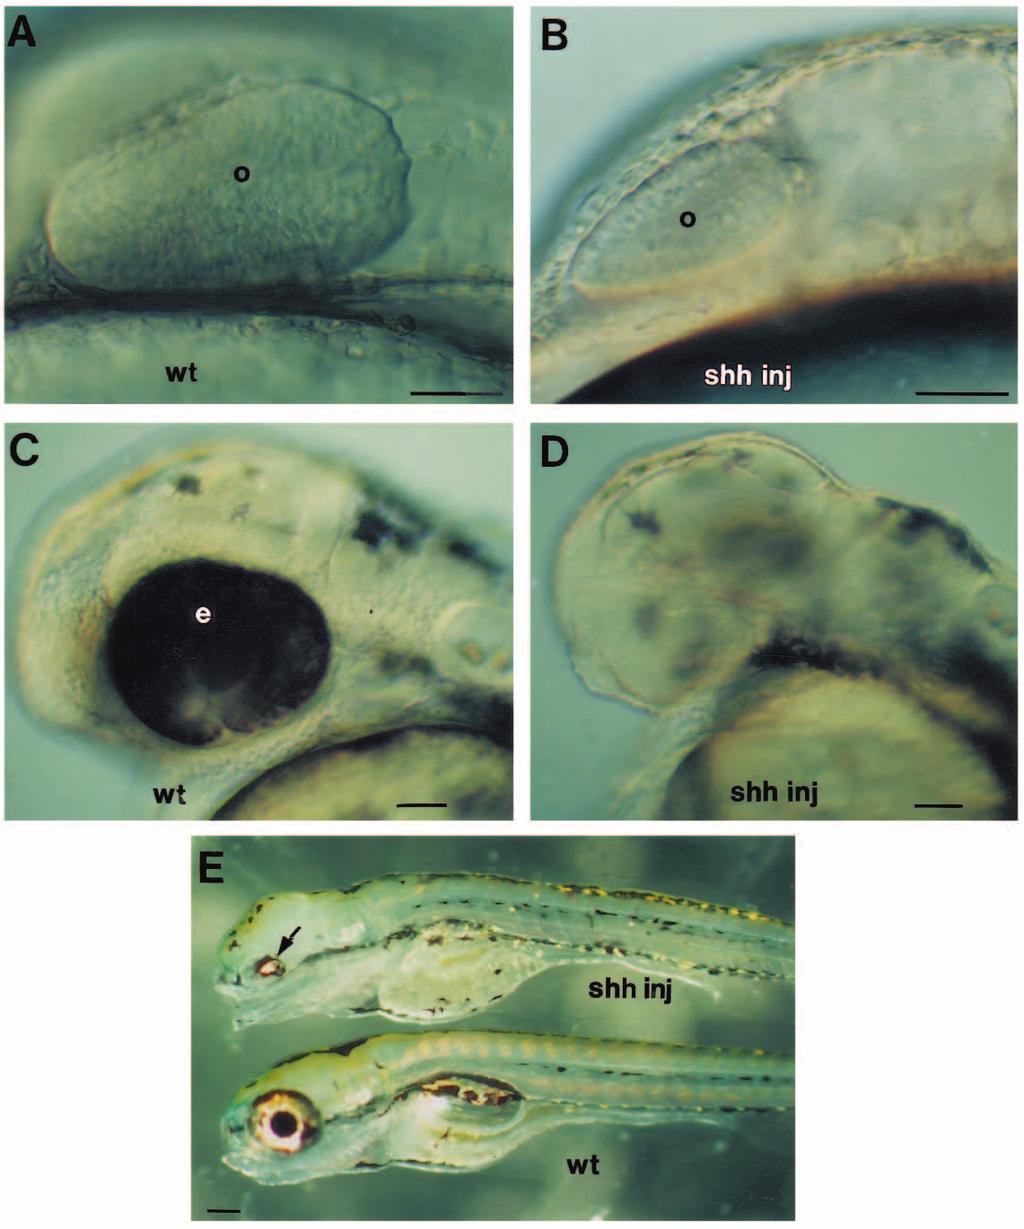 Pax proteins and eye development 3273 optic primordia distal and posterior to the hypertrophied optic stalk-like structures (Fig. 6C).